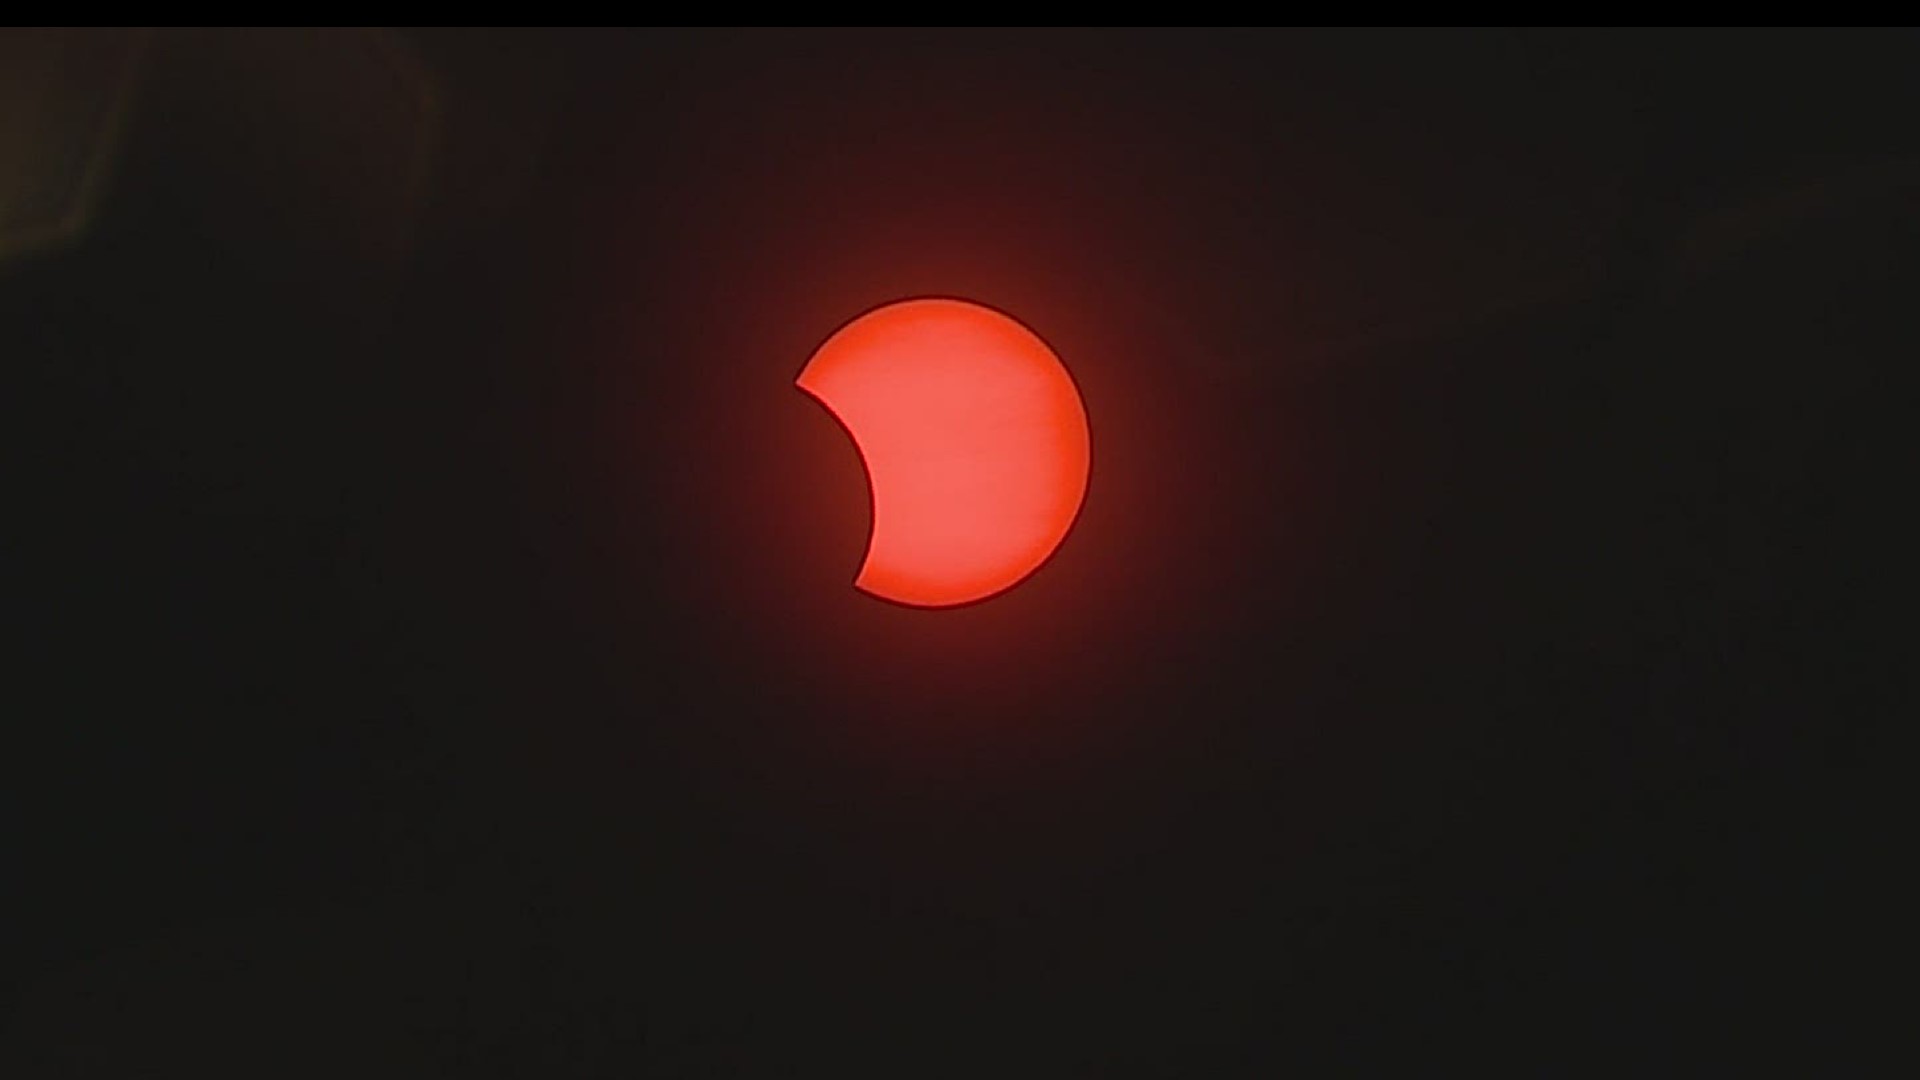 In different parts of Pennsylvania, we will not see a full eclipse, but many observatories are planning free events for the public to experience the event.